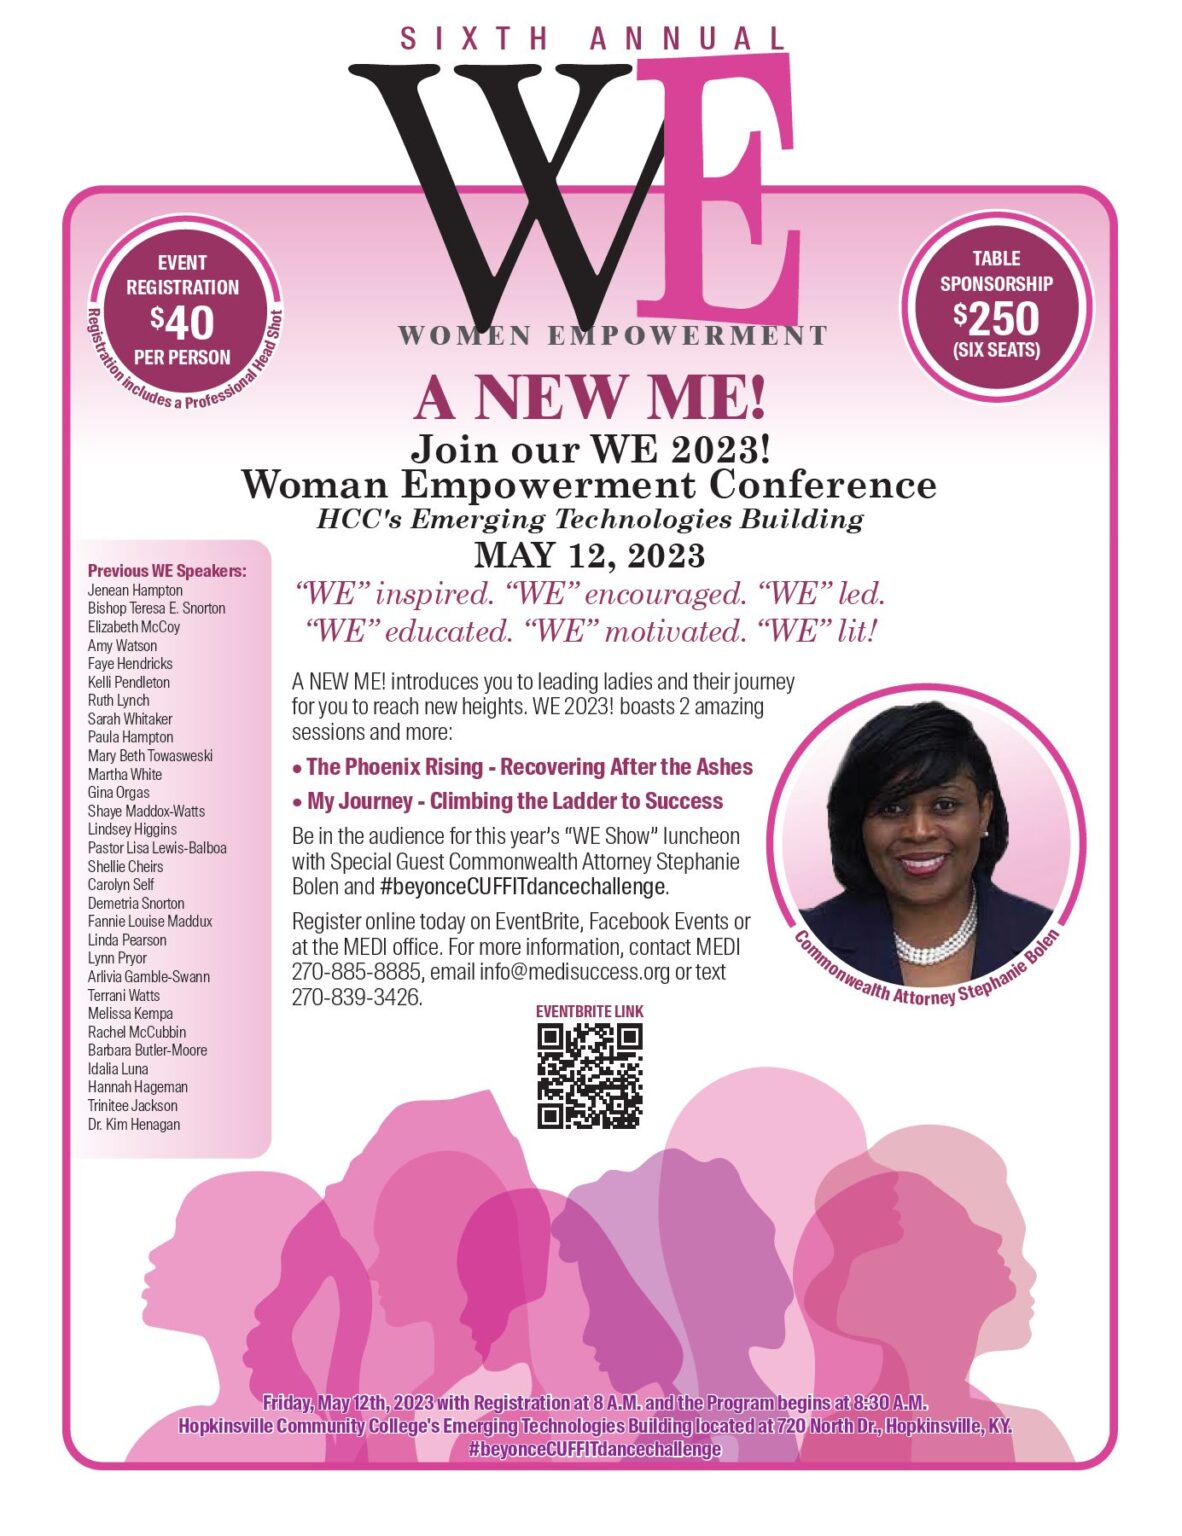 6TH ANNUAL “WE” WOMEN EMPOWERMENT CONFERENCE